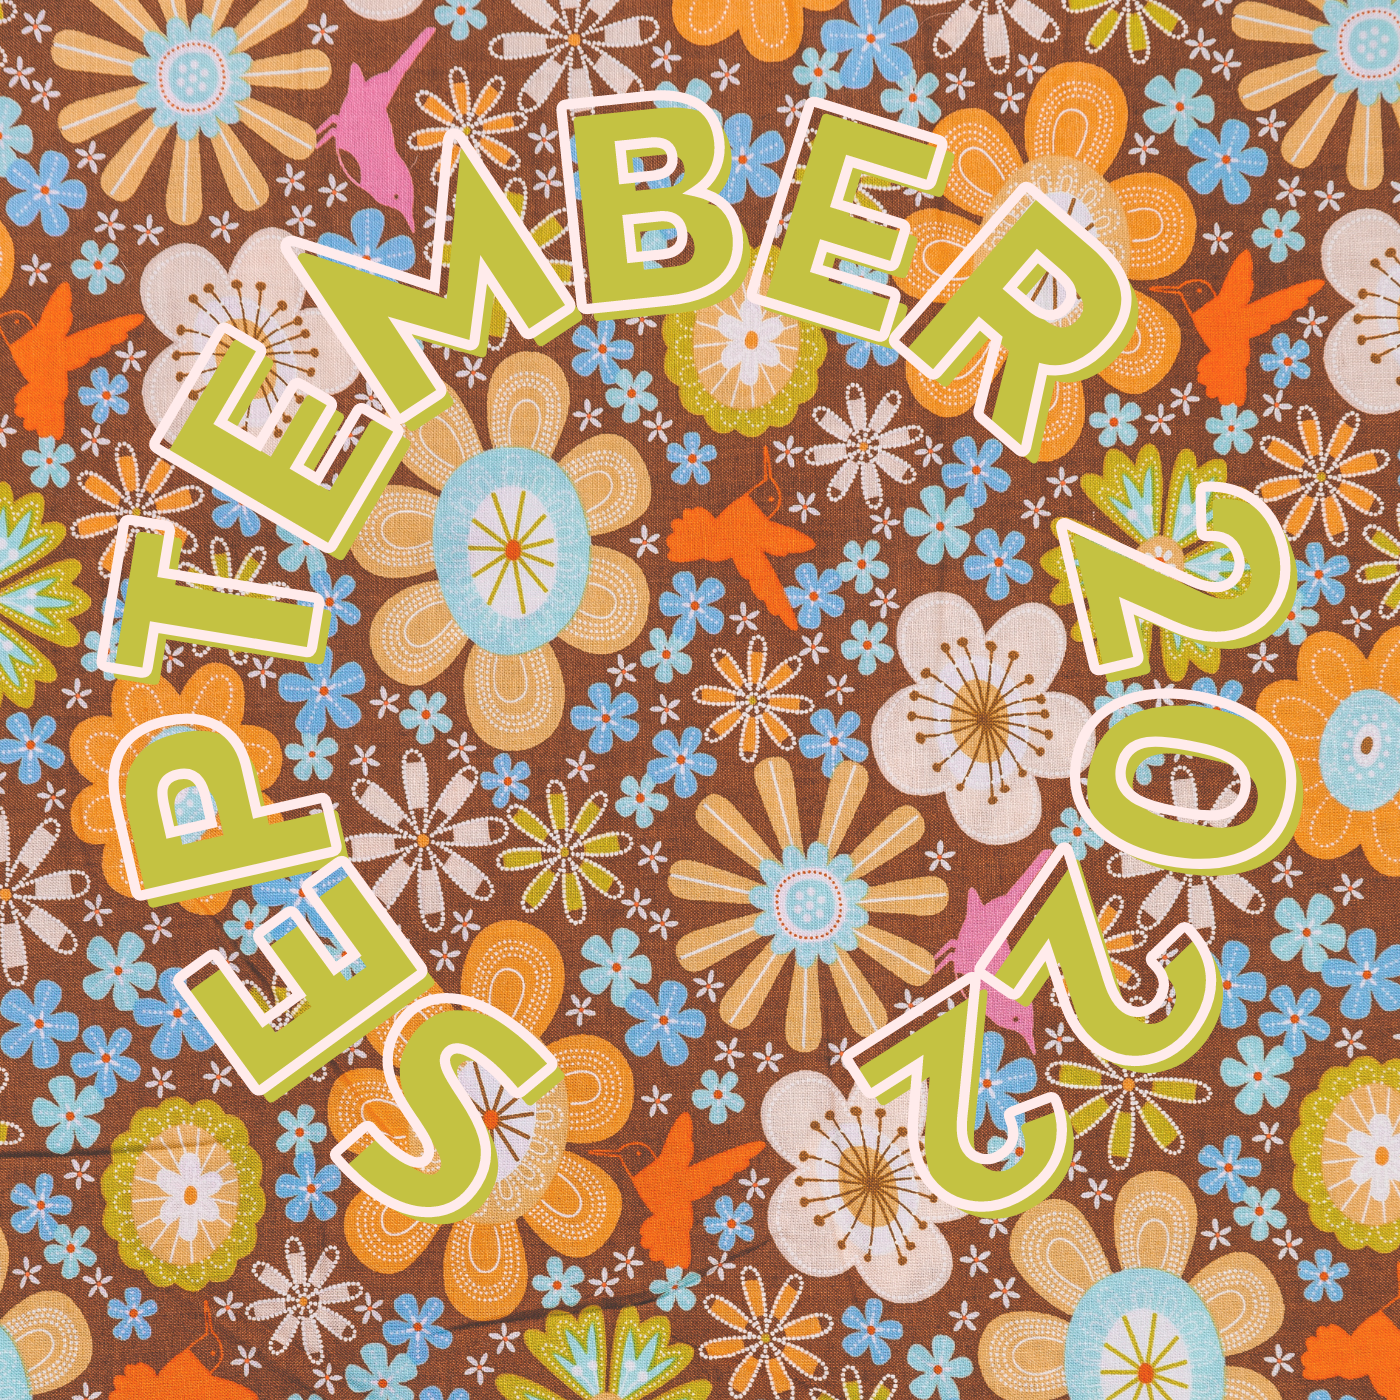 a 70s style floral print in blues greens browns yellows and pinks with september 2022 in a sans-serif font curved in a circle at the center